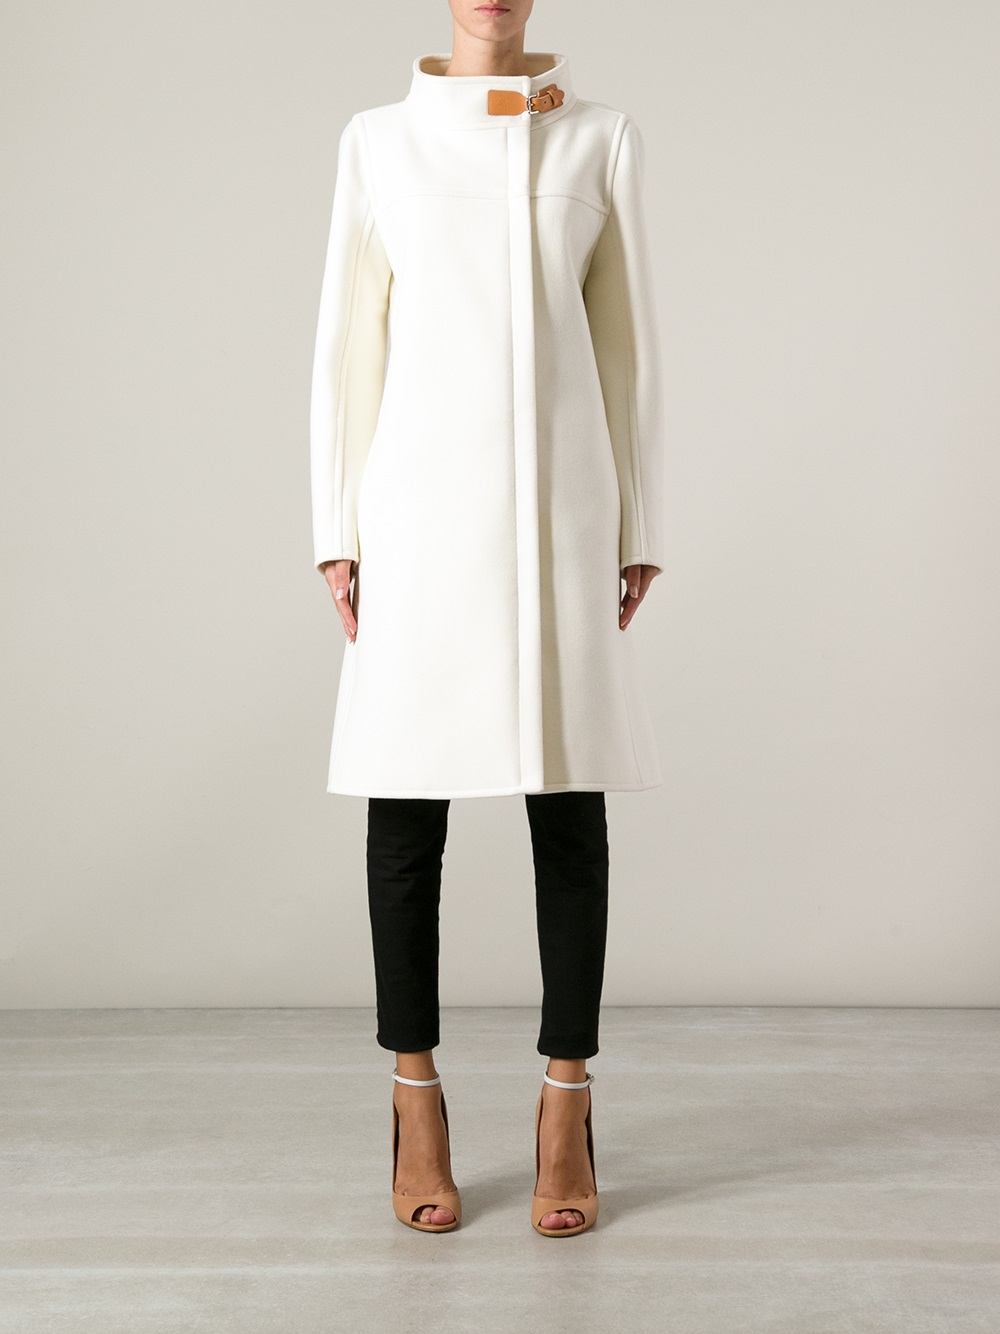 Lyst - Courreges Buckle Fastening Funnel Neck Coat in White